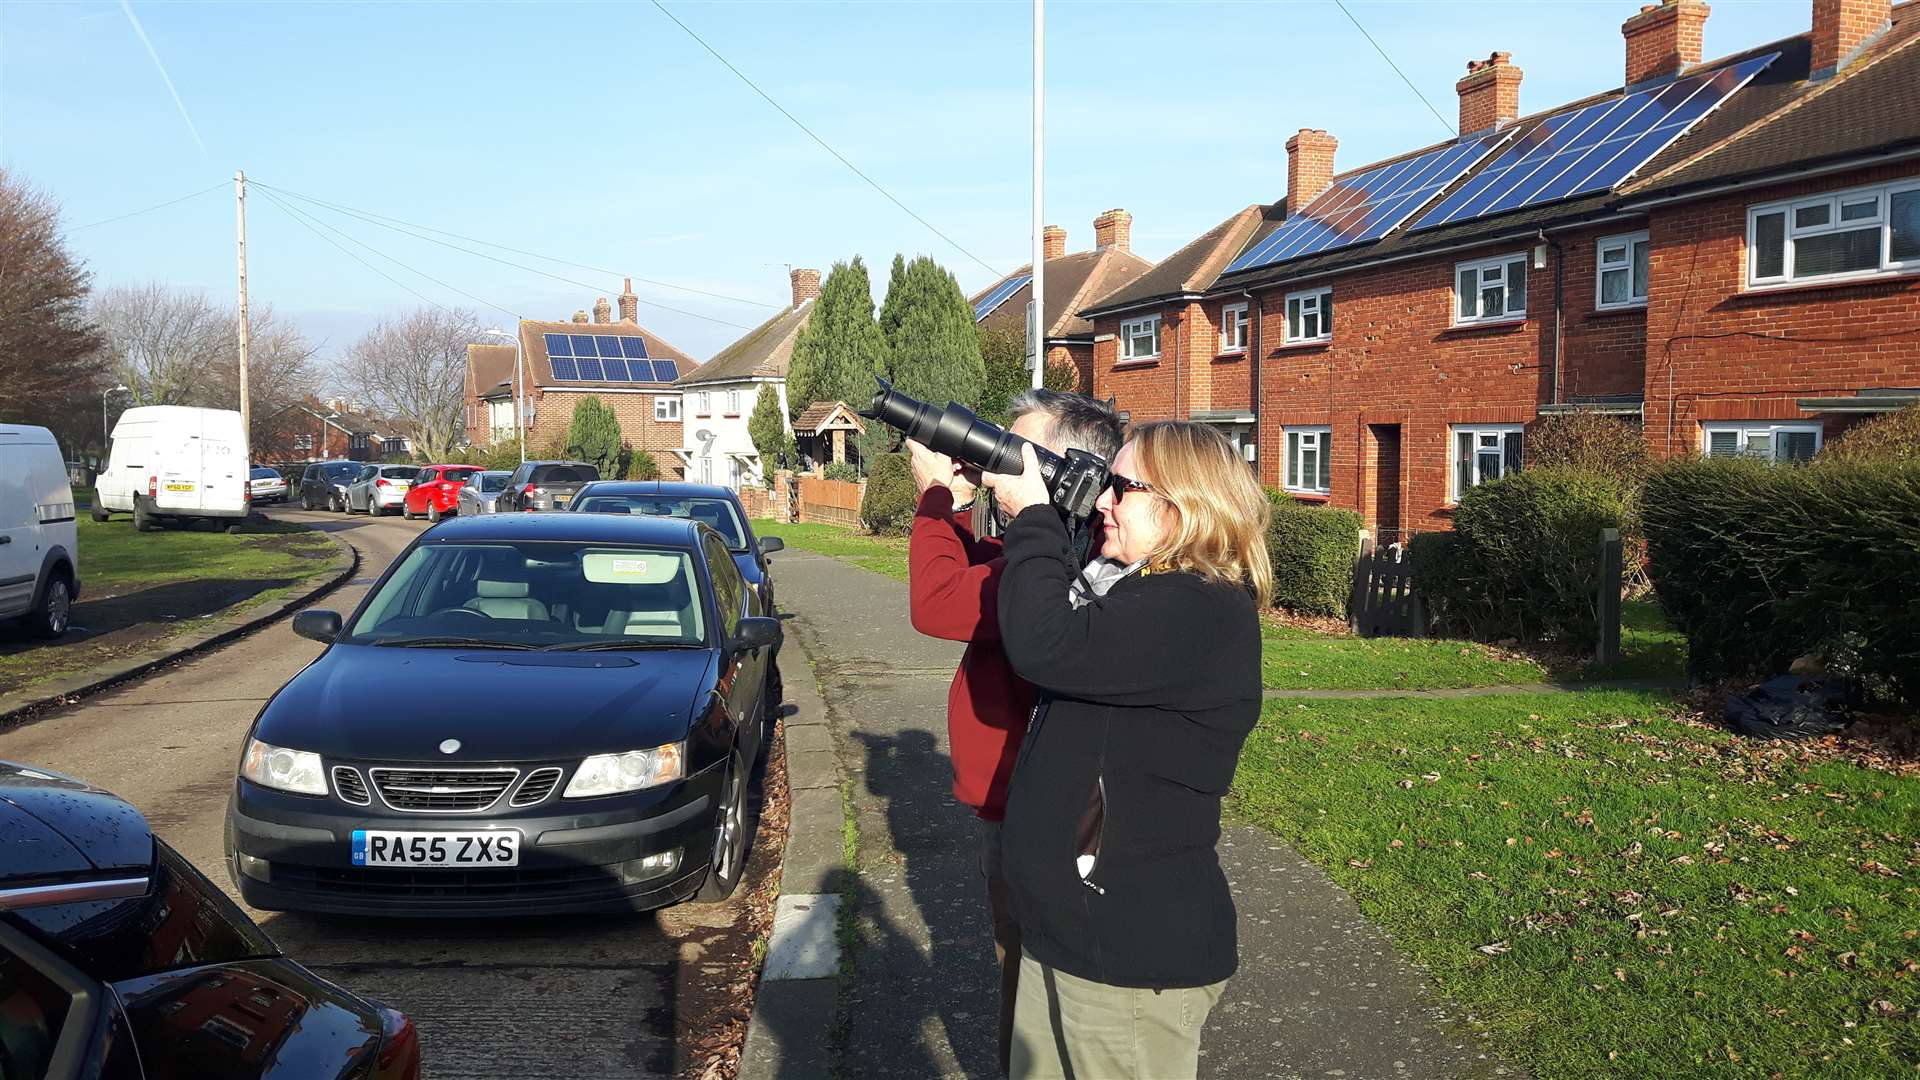 Jenny LeBeau and Tim Ballard were among the birdwatchers who descended on Coldharbour Road, Northfleet